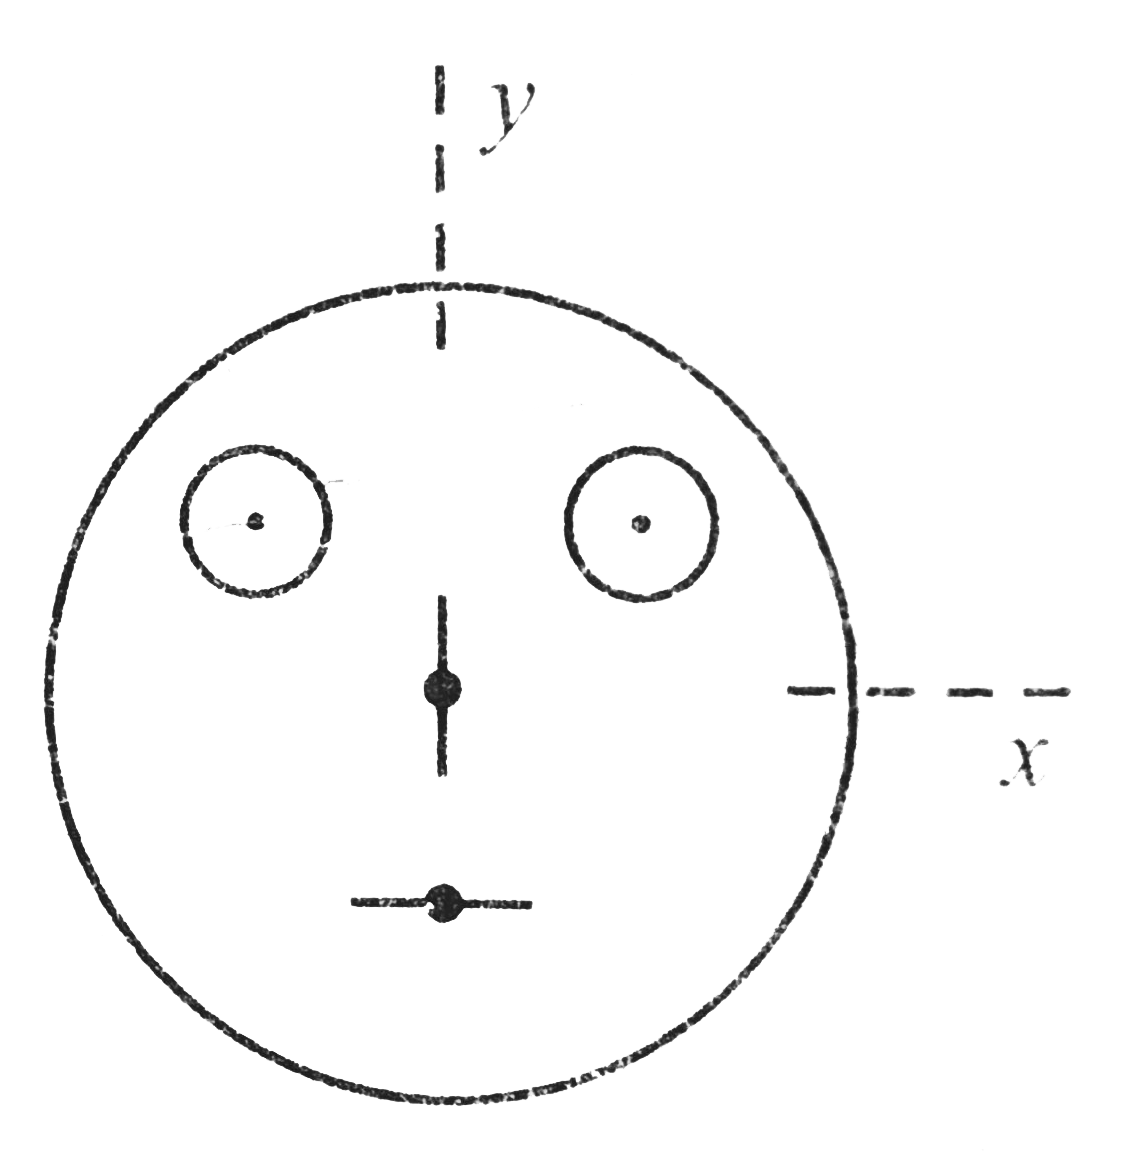 Look at the drawing given in the figure which has been drawn with ink of uniform line-thickness. The mass of ink used to draw each of the two inner circles, and each of the two line segments is m. The mass of the ink used to draw the outer circle is 6m.  The coordinates of the centres of the different parts are: outer circle (0, 0), left inner circle (-a, a), right inner circle (a, a), vertical line (0, 0) and horizontal line (0, -a). The y-coordinate of the centre of mass of the ink in this drawing is